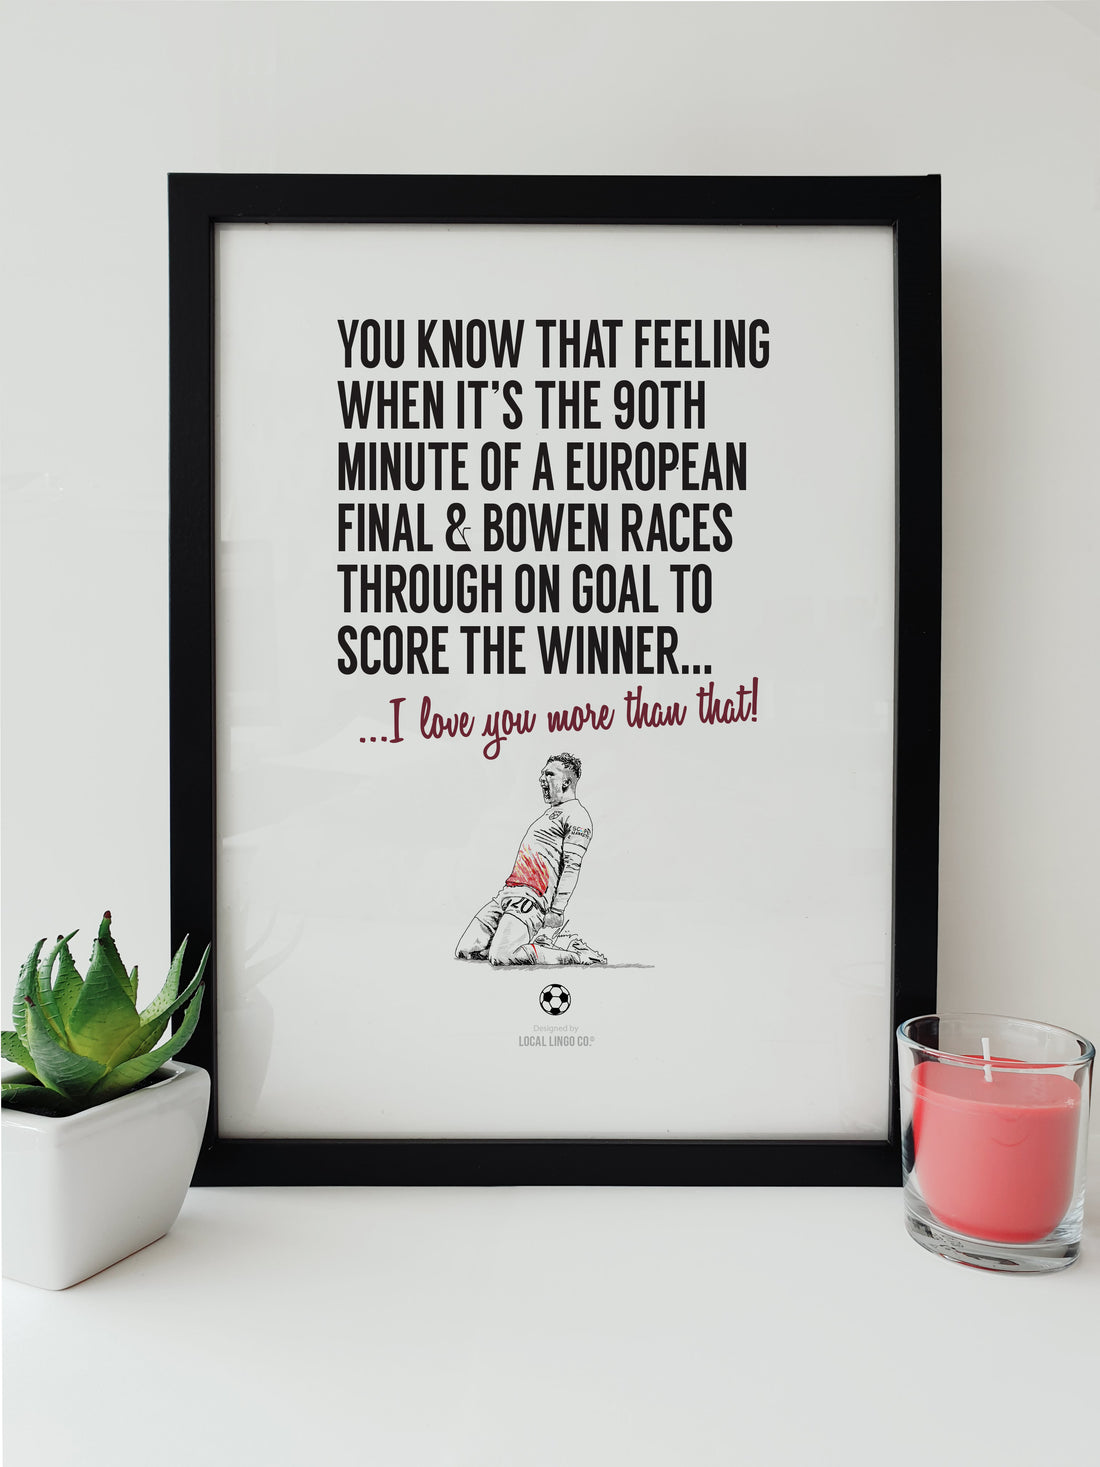 West Ham United FC themed print - Illustration of Jarrod Bowen celebrating his winning goal in the 90th minute of the Europa Conference League Final against Fiorentina. The print features the wording: "You know that feeling when it's the 90th minute of a European final and Bowen races through to score the winner... I love you more than that!" designed by local lingo